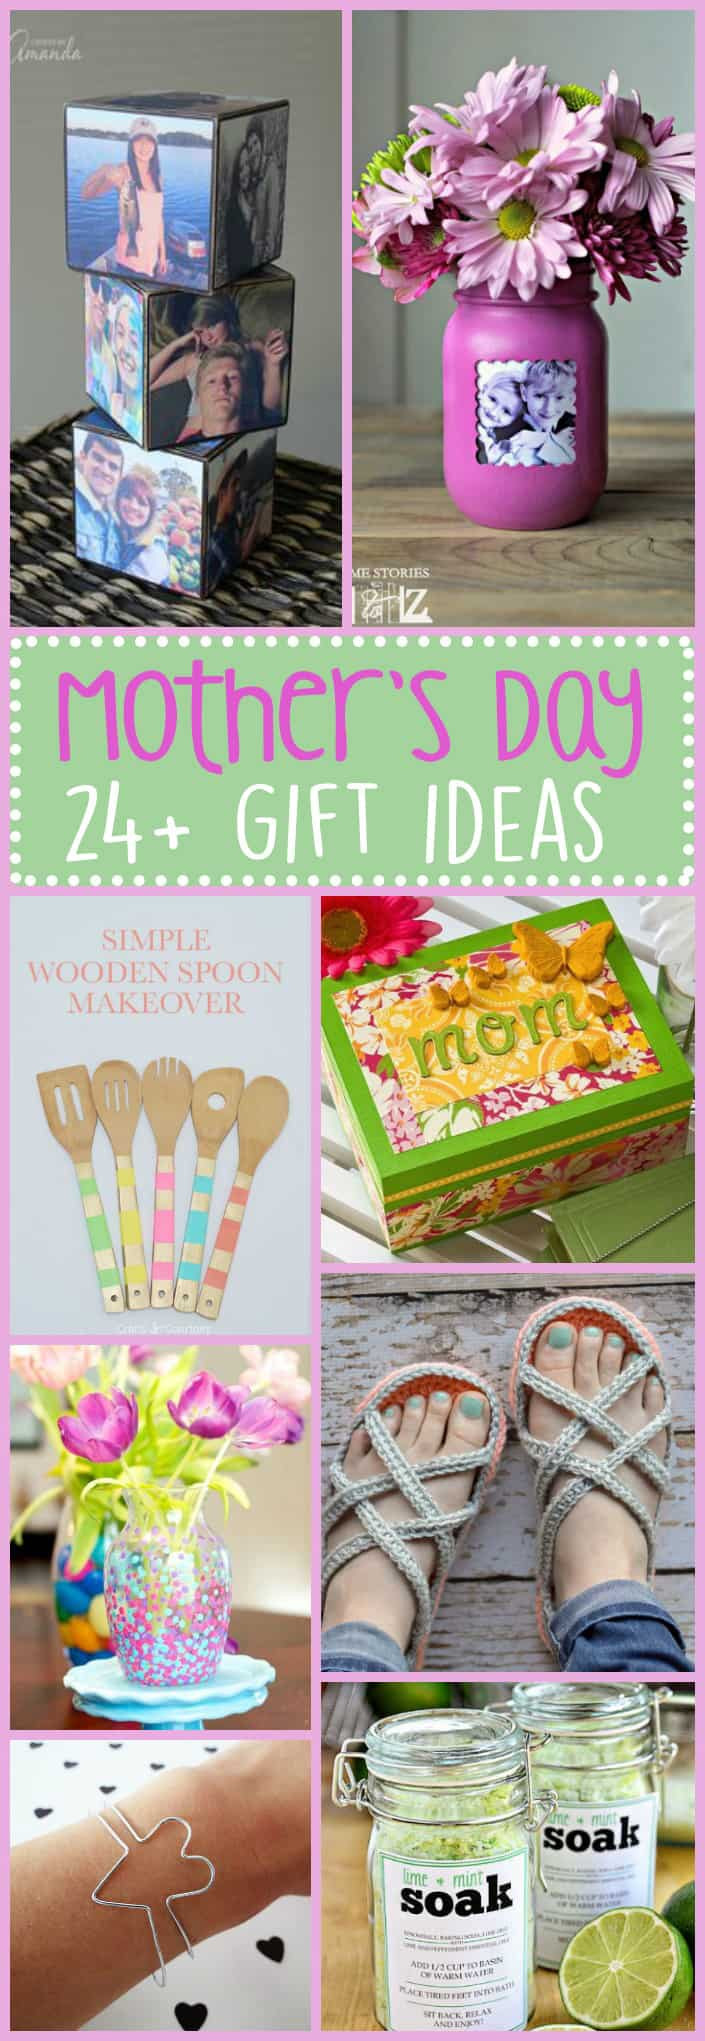 Mothers Da Gift Ideas
 Mother s Day Gift Ideas 24 t ideas for Mother s Day